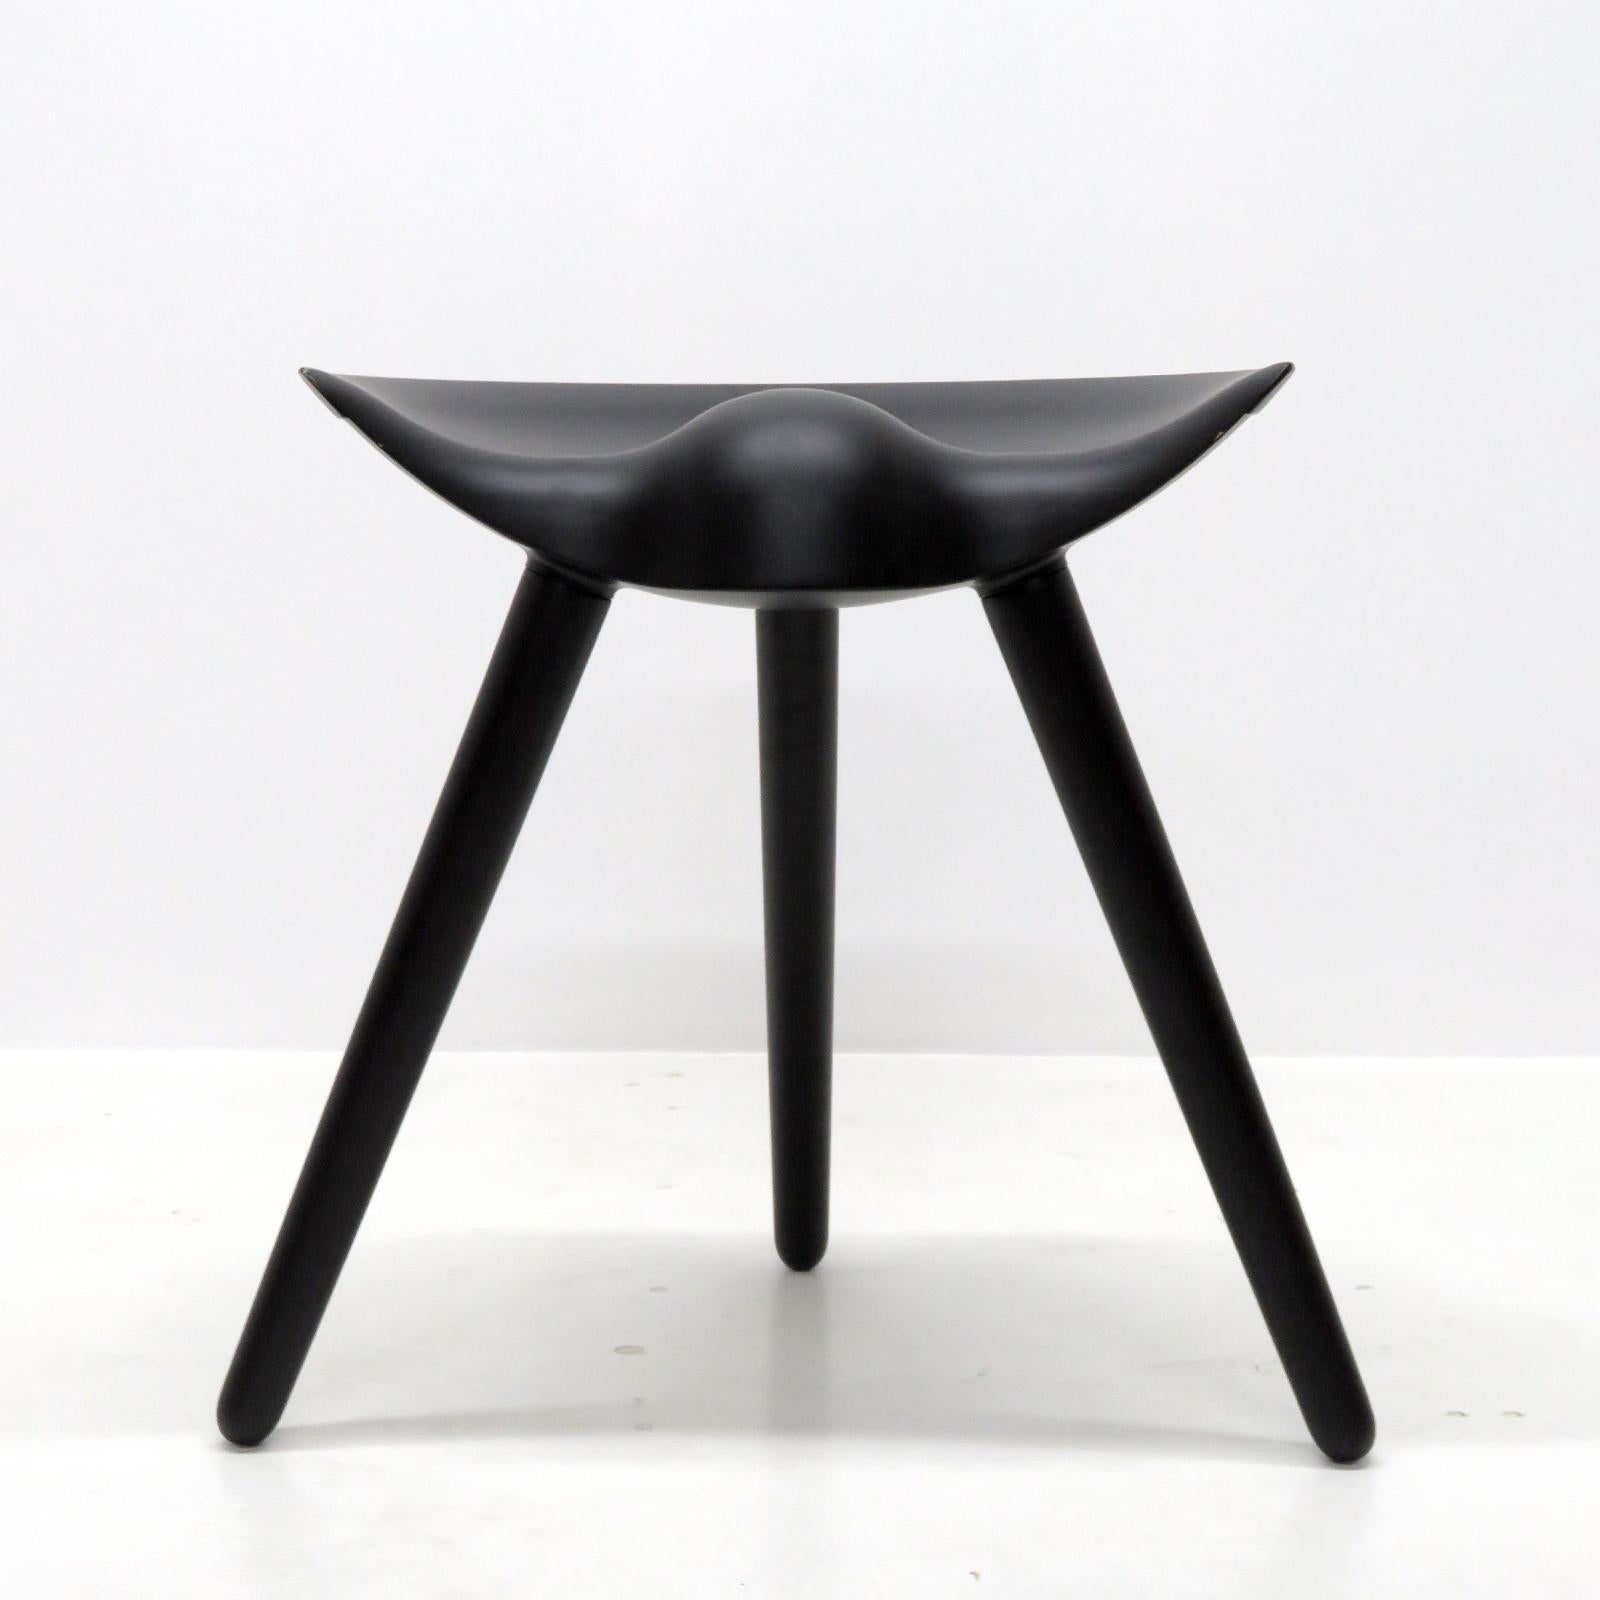 Wonderful stool by Mogens Lassen, in solid, black-stained beech wood with a semi-circular seat on three tapered, round legs, manufactured and branded 'By Lassen, Copenhagen'. Priced individually.
 